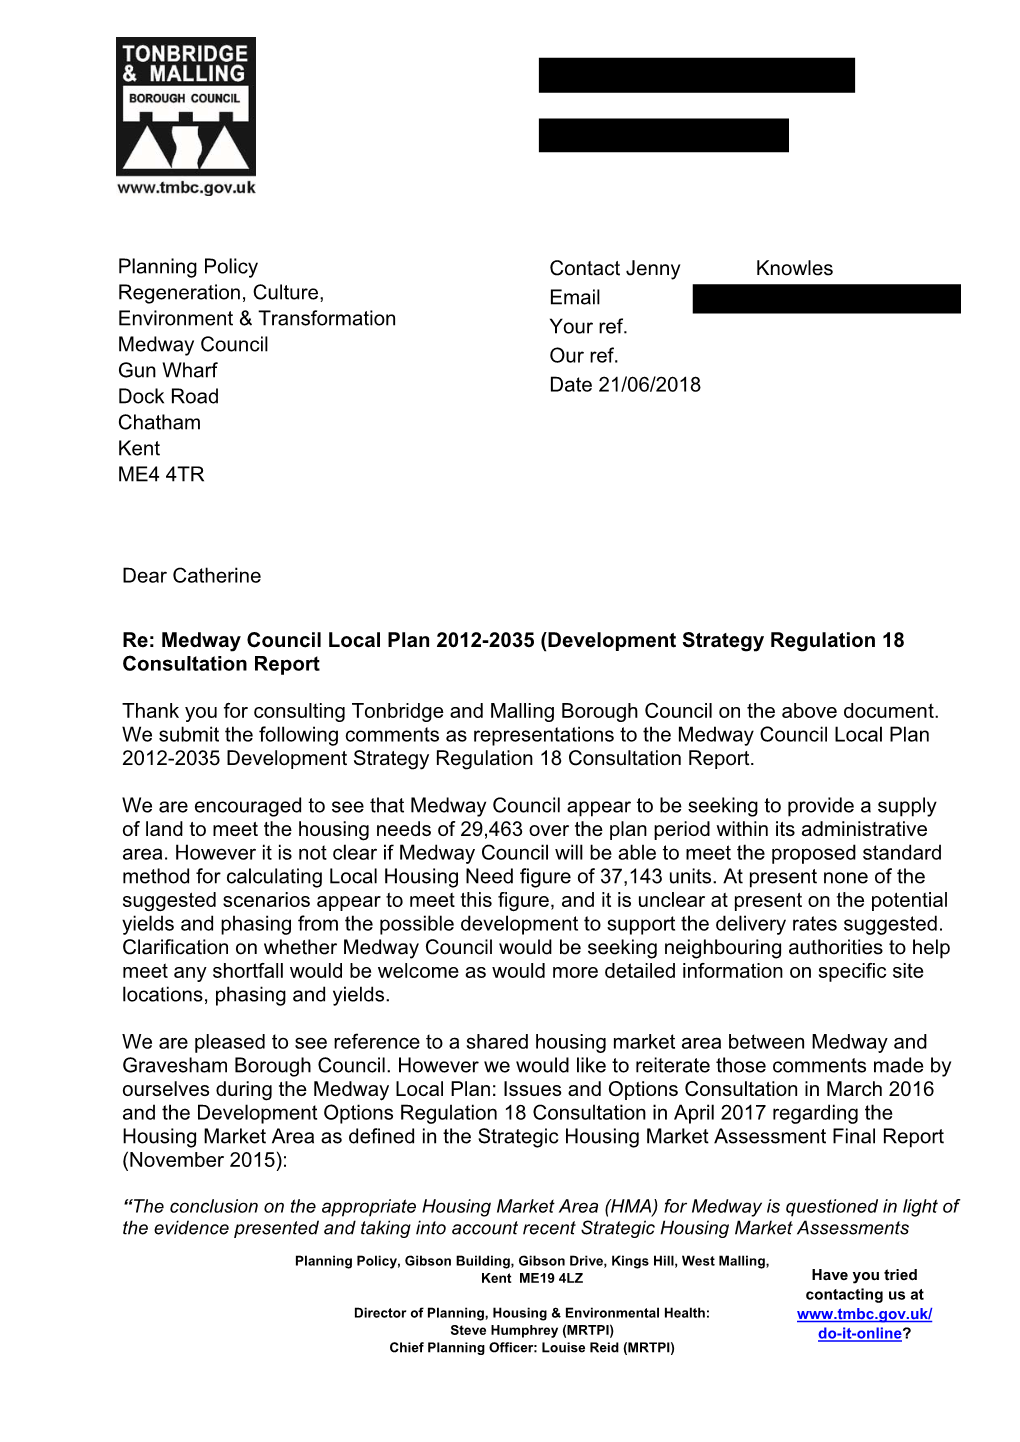 Dear Catherine Re: Medway Council Local Plan 2012-2035